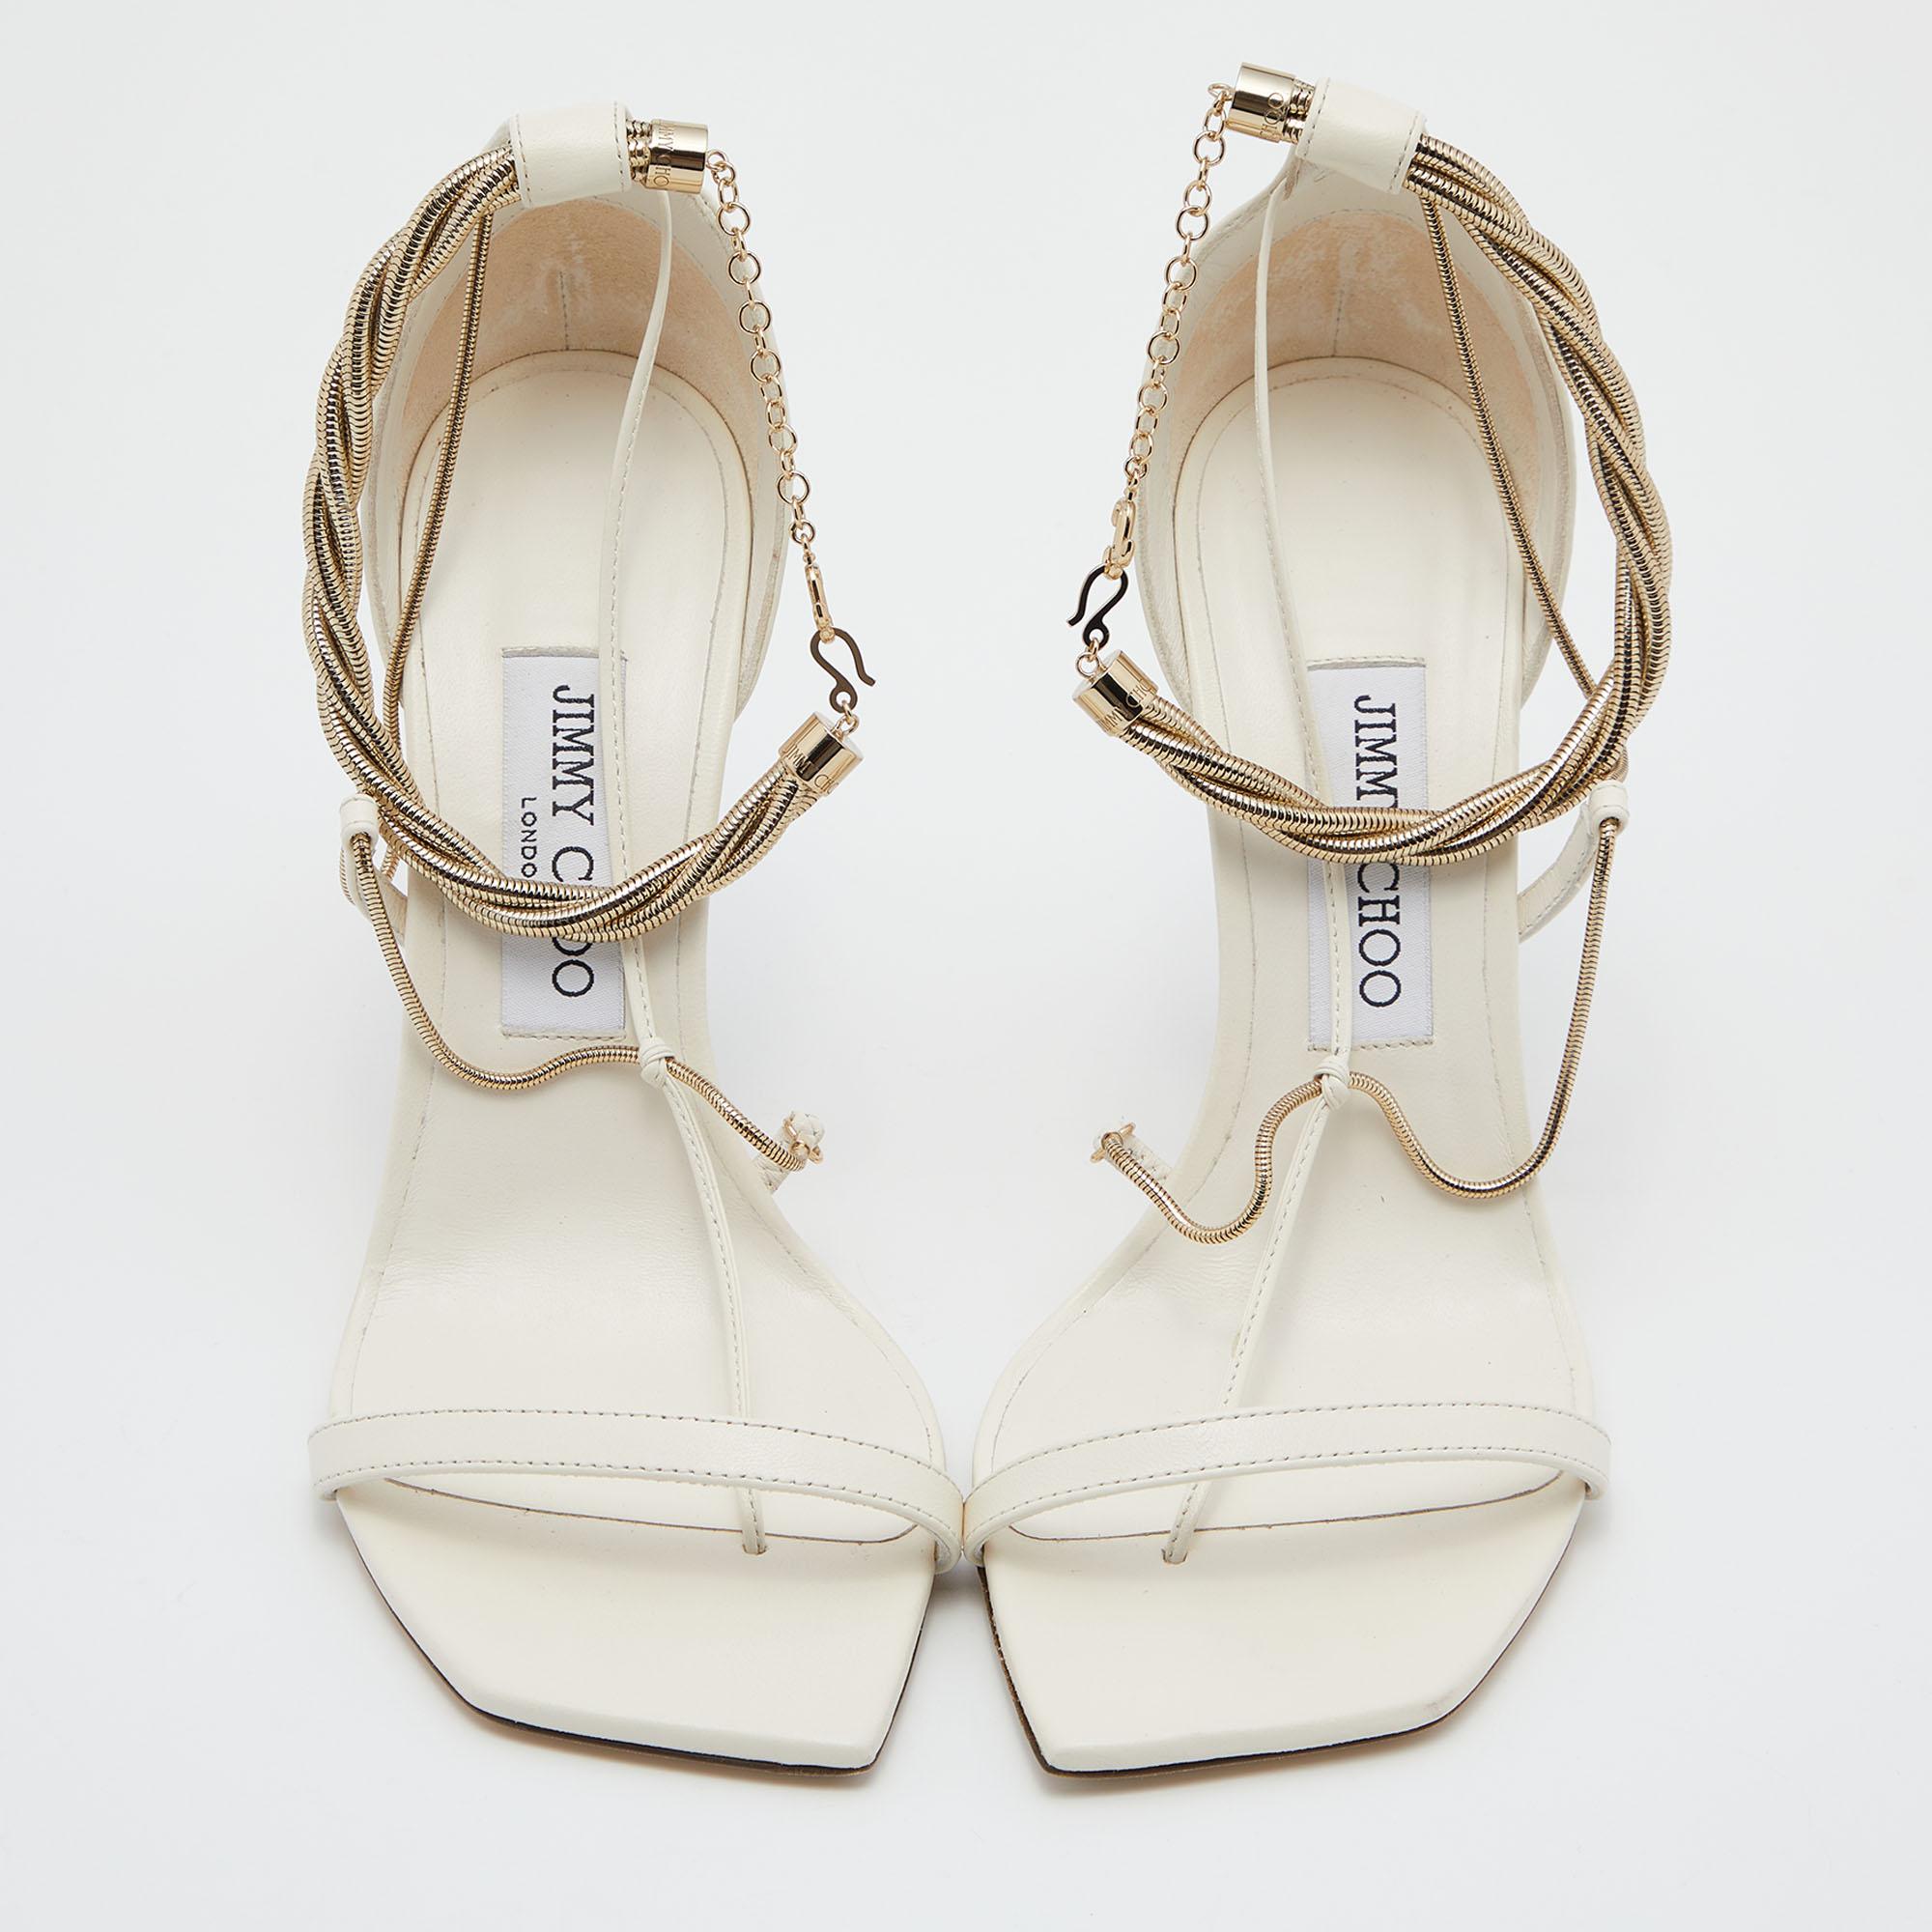 Frame your feet with these Jimmy Choo high heel sandals. Created using the best materials, the shoes are perfect with short, midi, and maxi hemlines.

Includes: Original Dustbag

